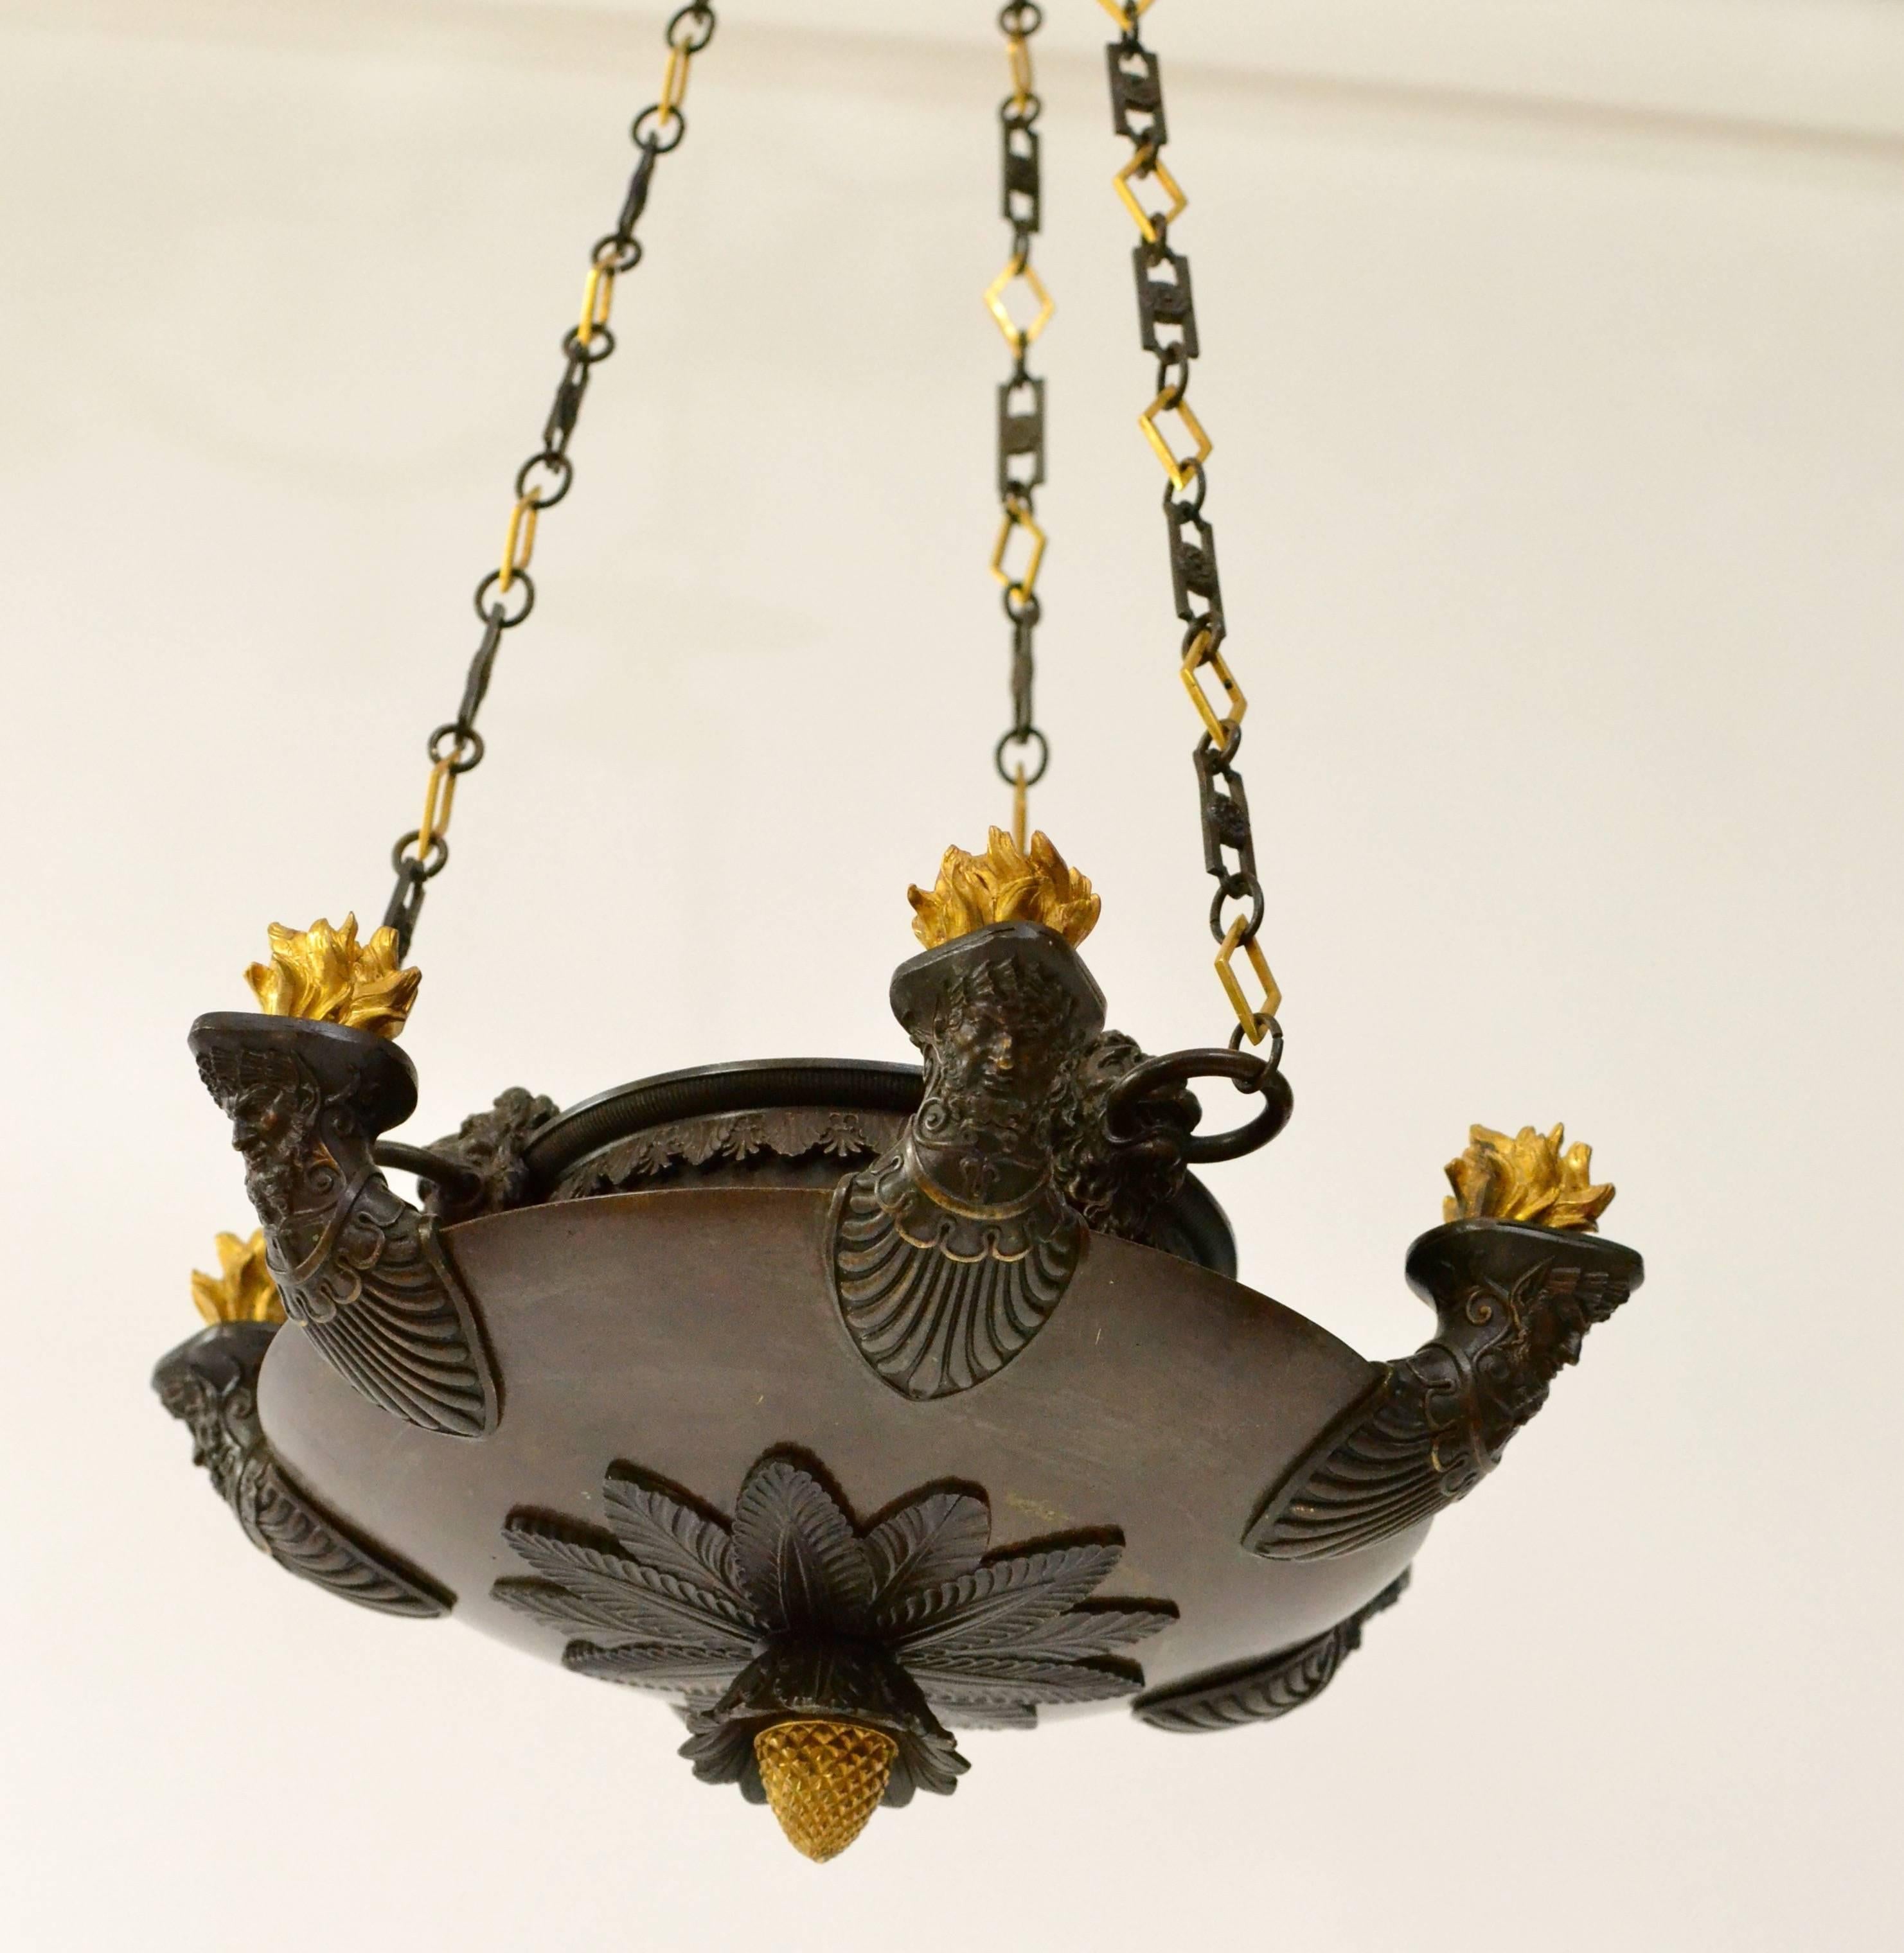 A patinated and gilt bronze Empire chandelier of fine quality.